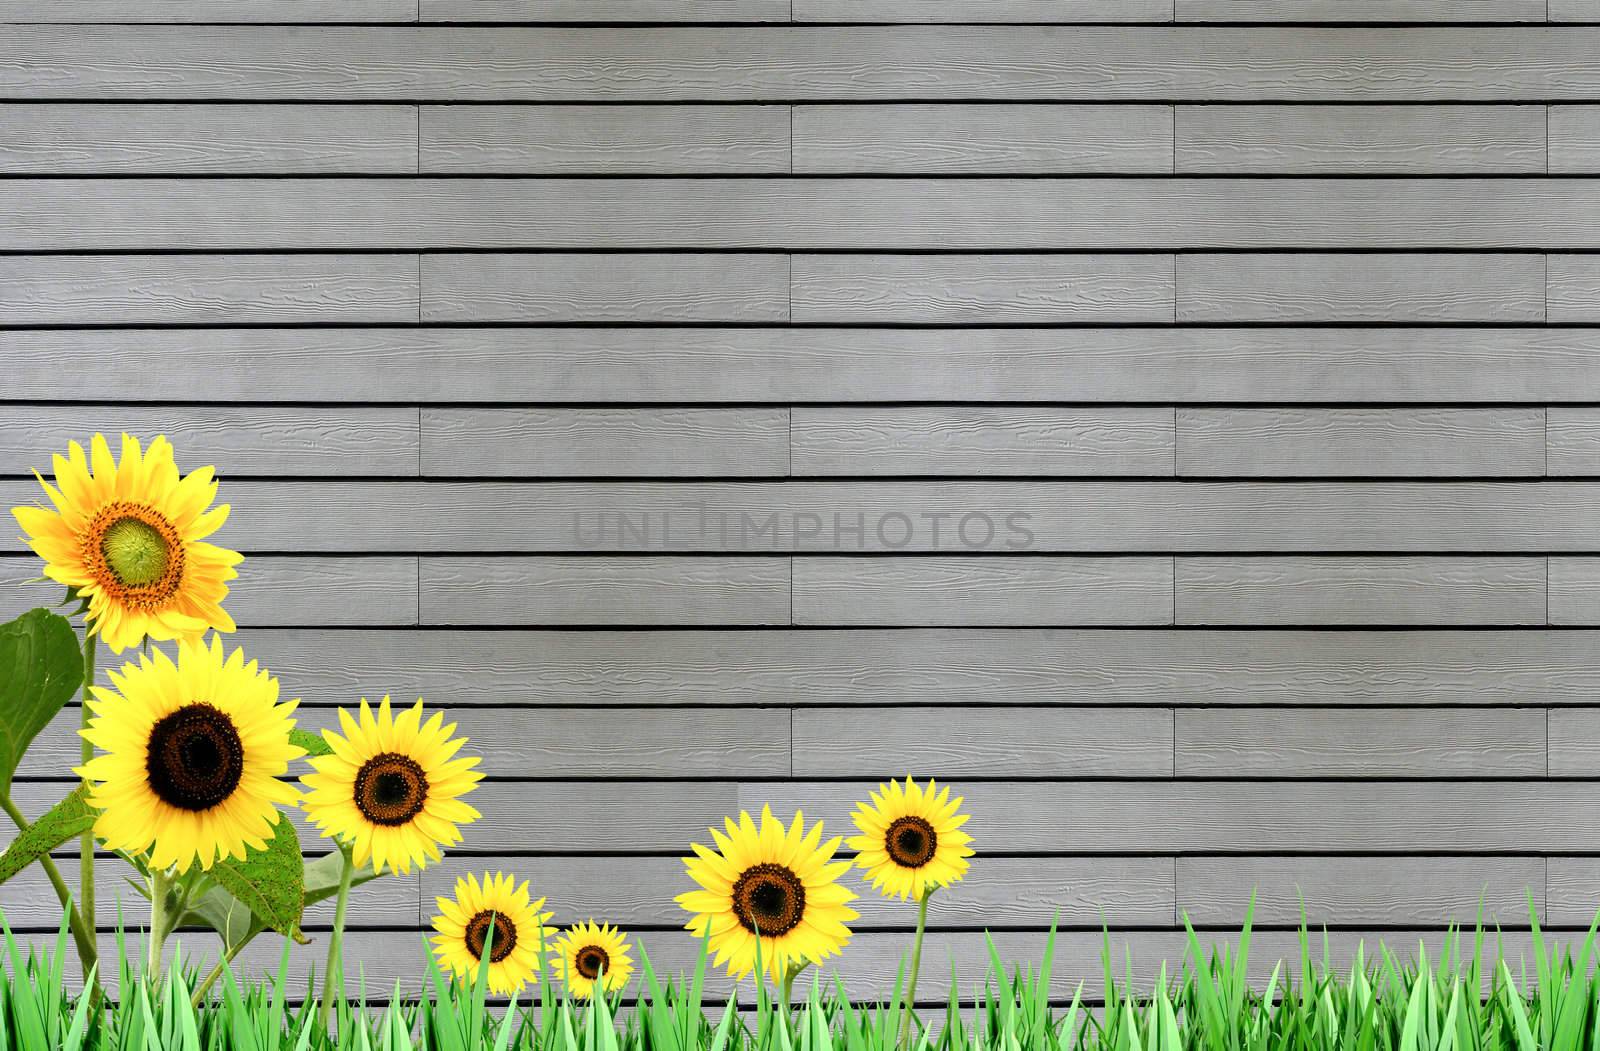 Wood and Grass for background and text